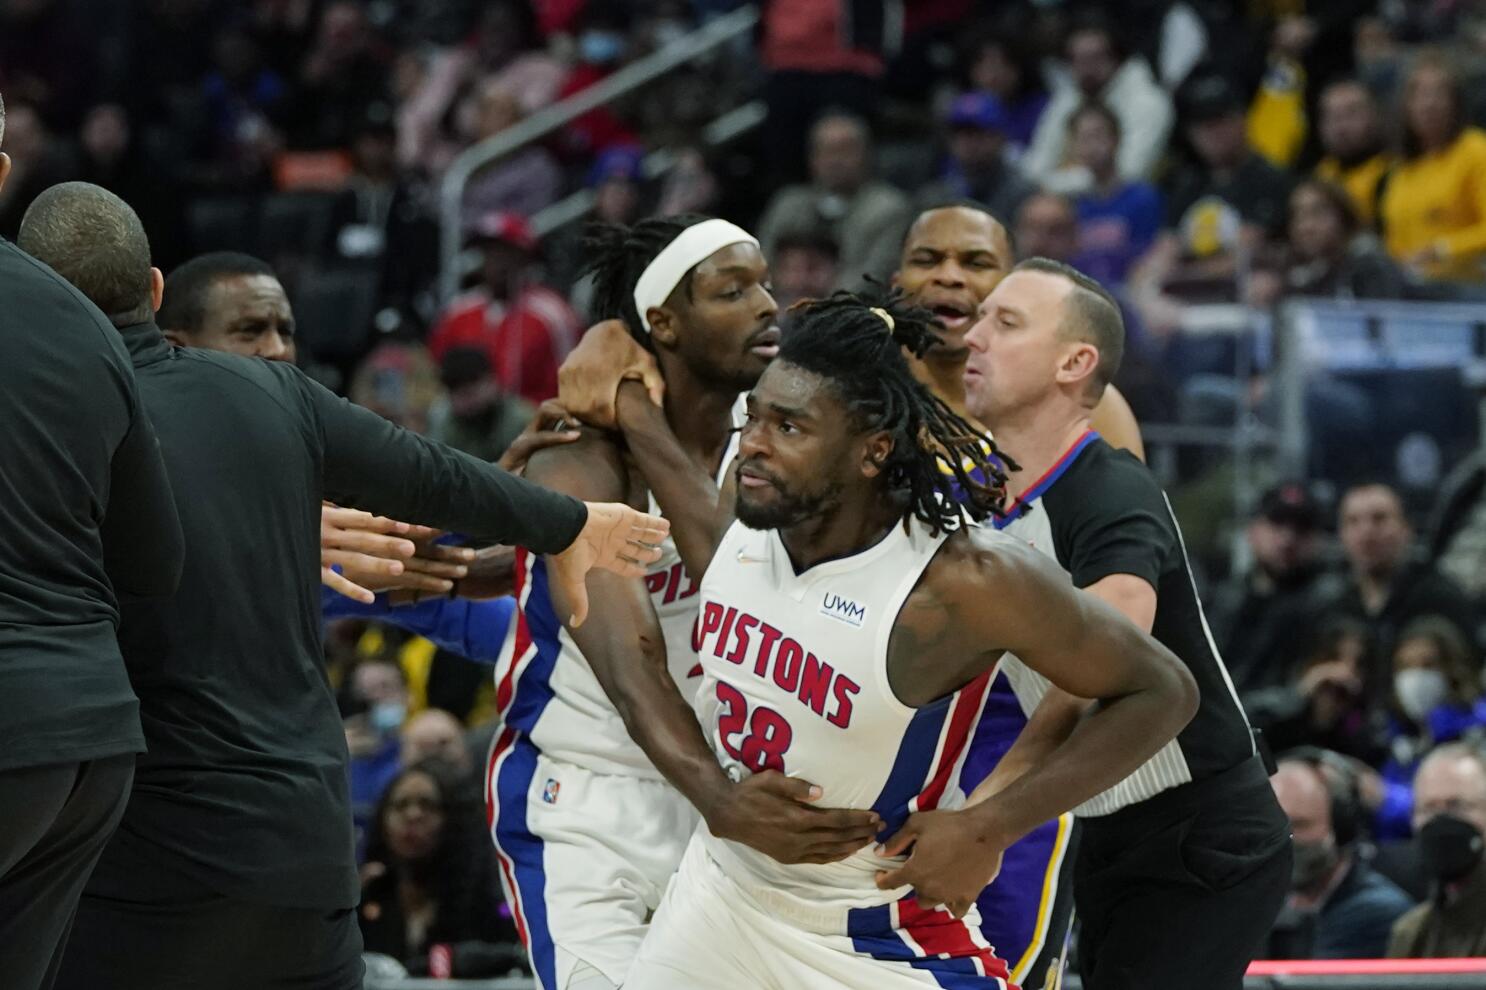 James draws blood on Stewart's face in Pistons-Lakers melee - The San Diego  Union-Tribune